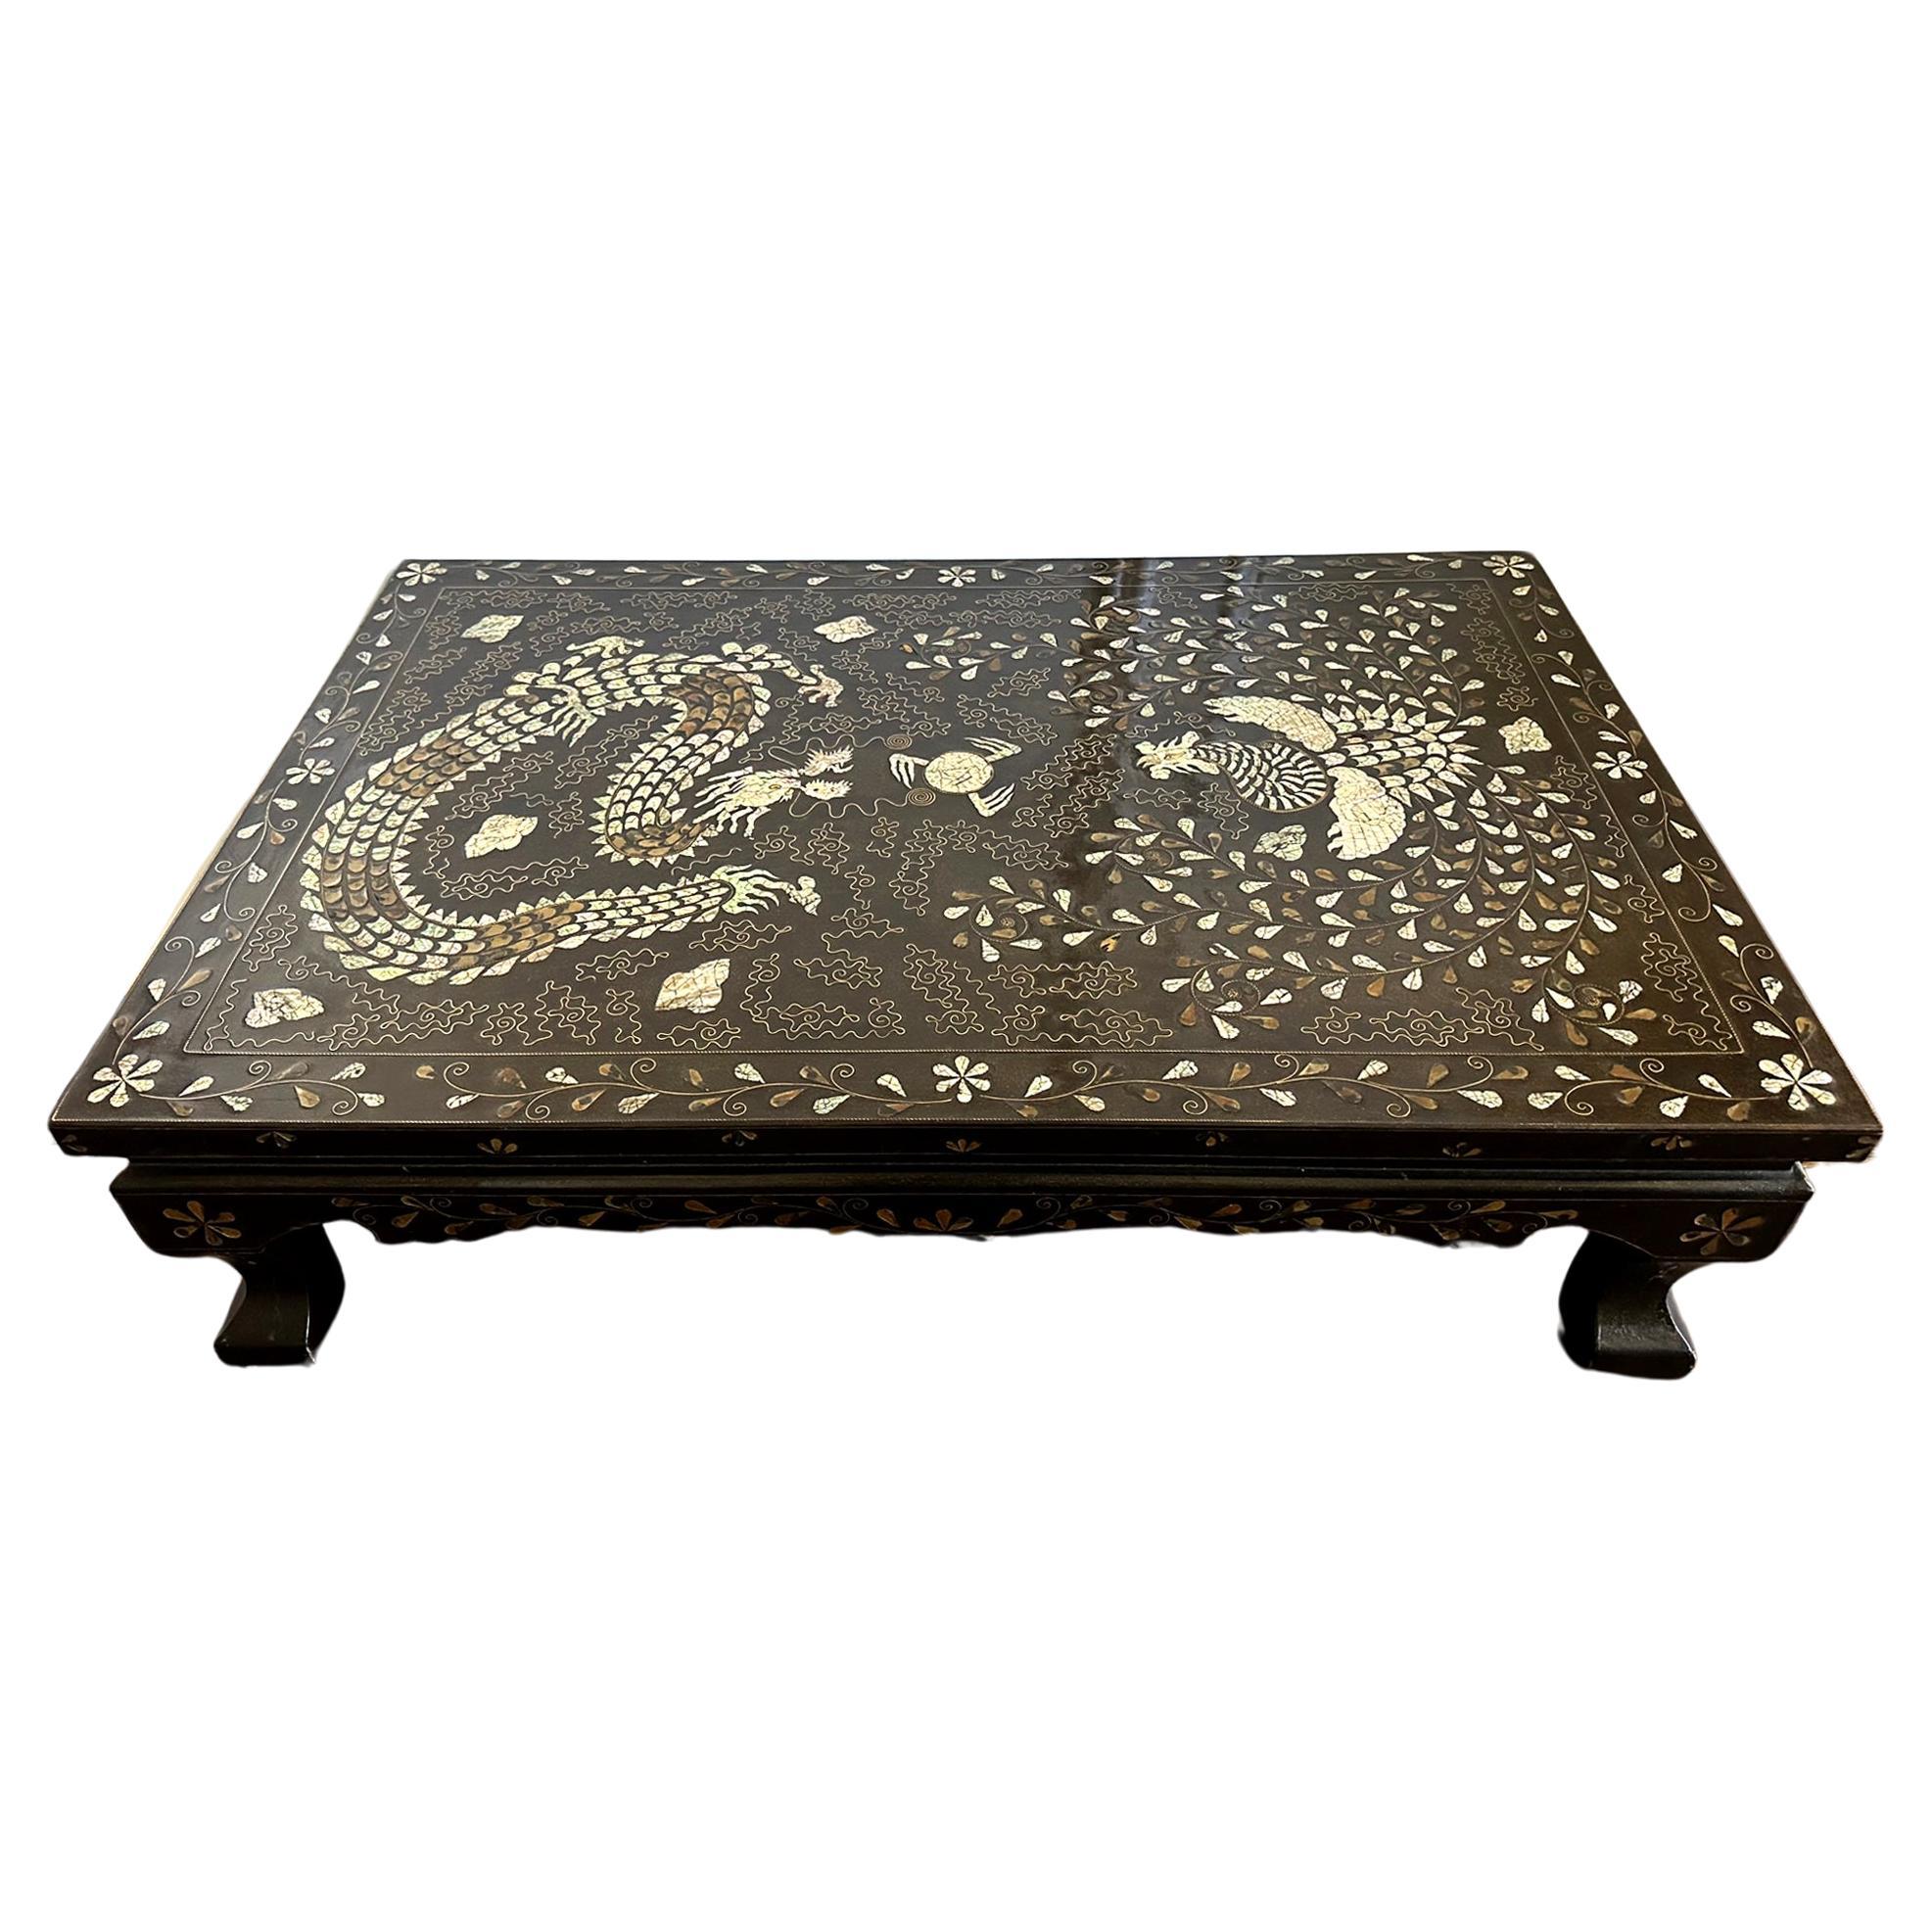 Korean Low Lacquer Table with Elaborate Inlays For Sale